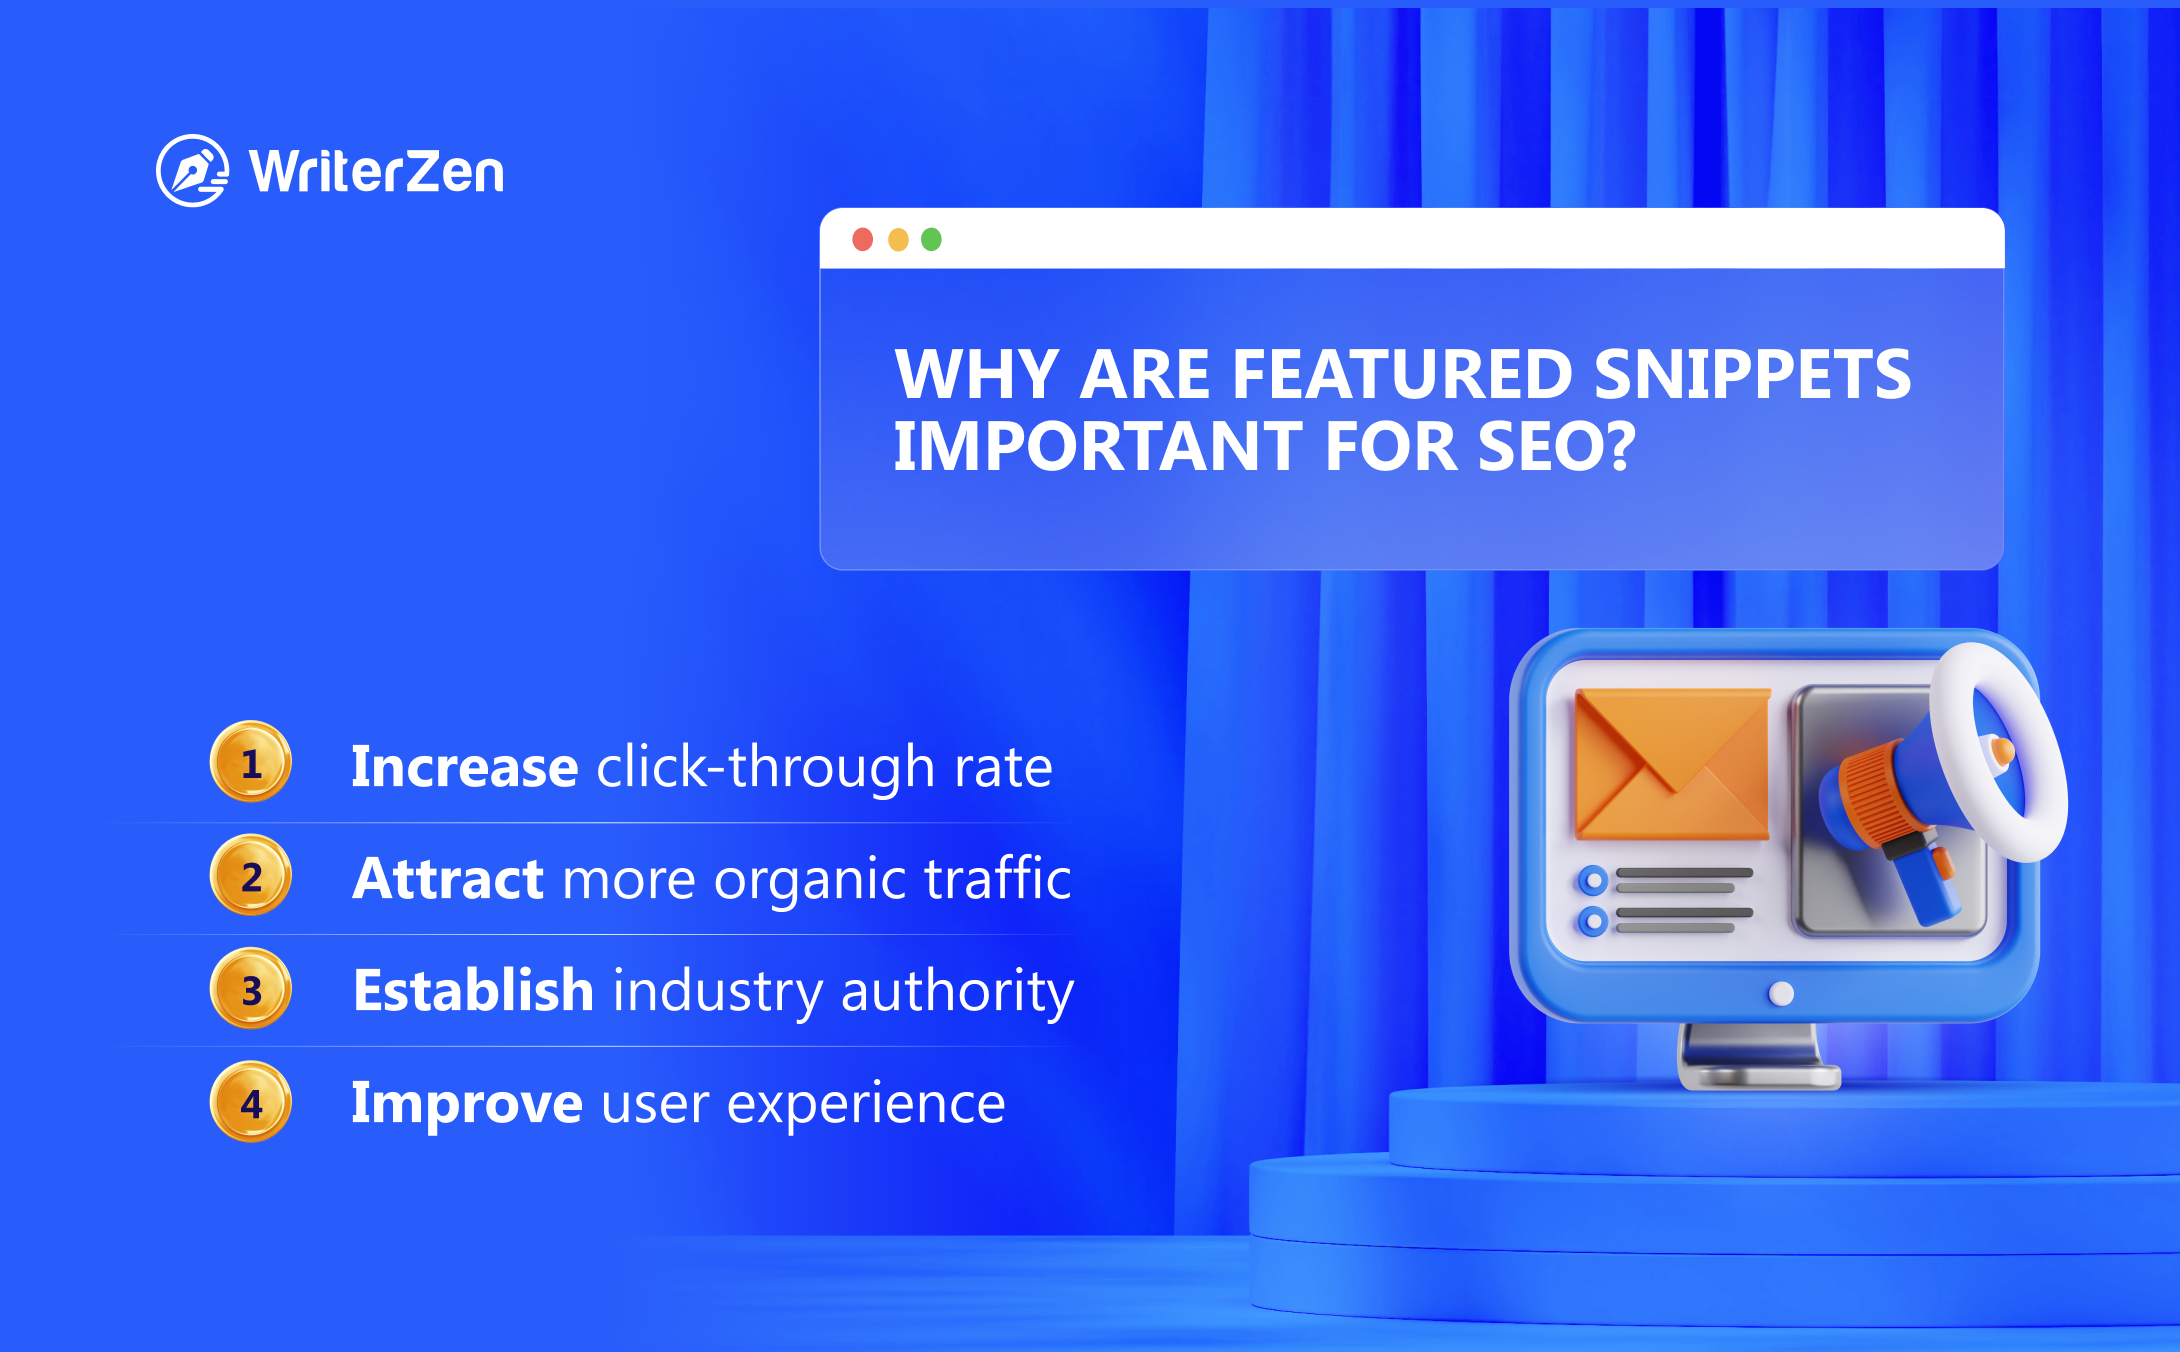 Why Are Featured Snippets Important for SEO?